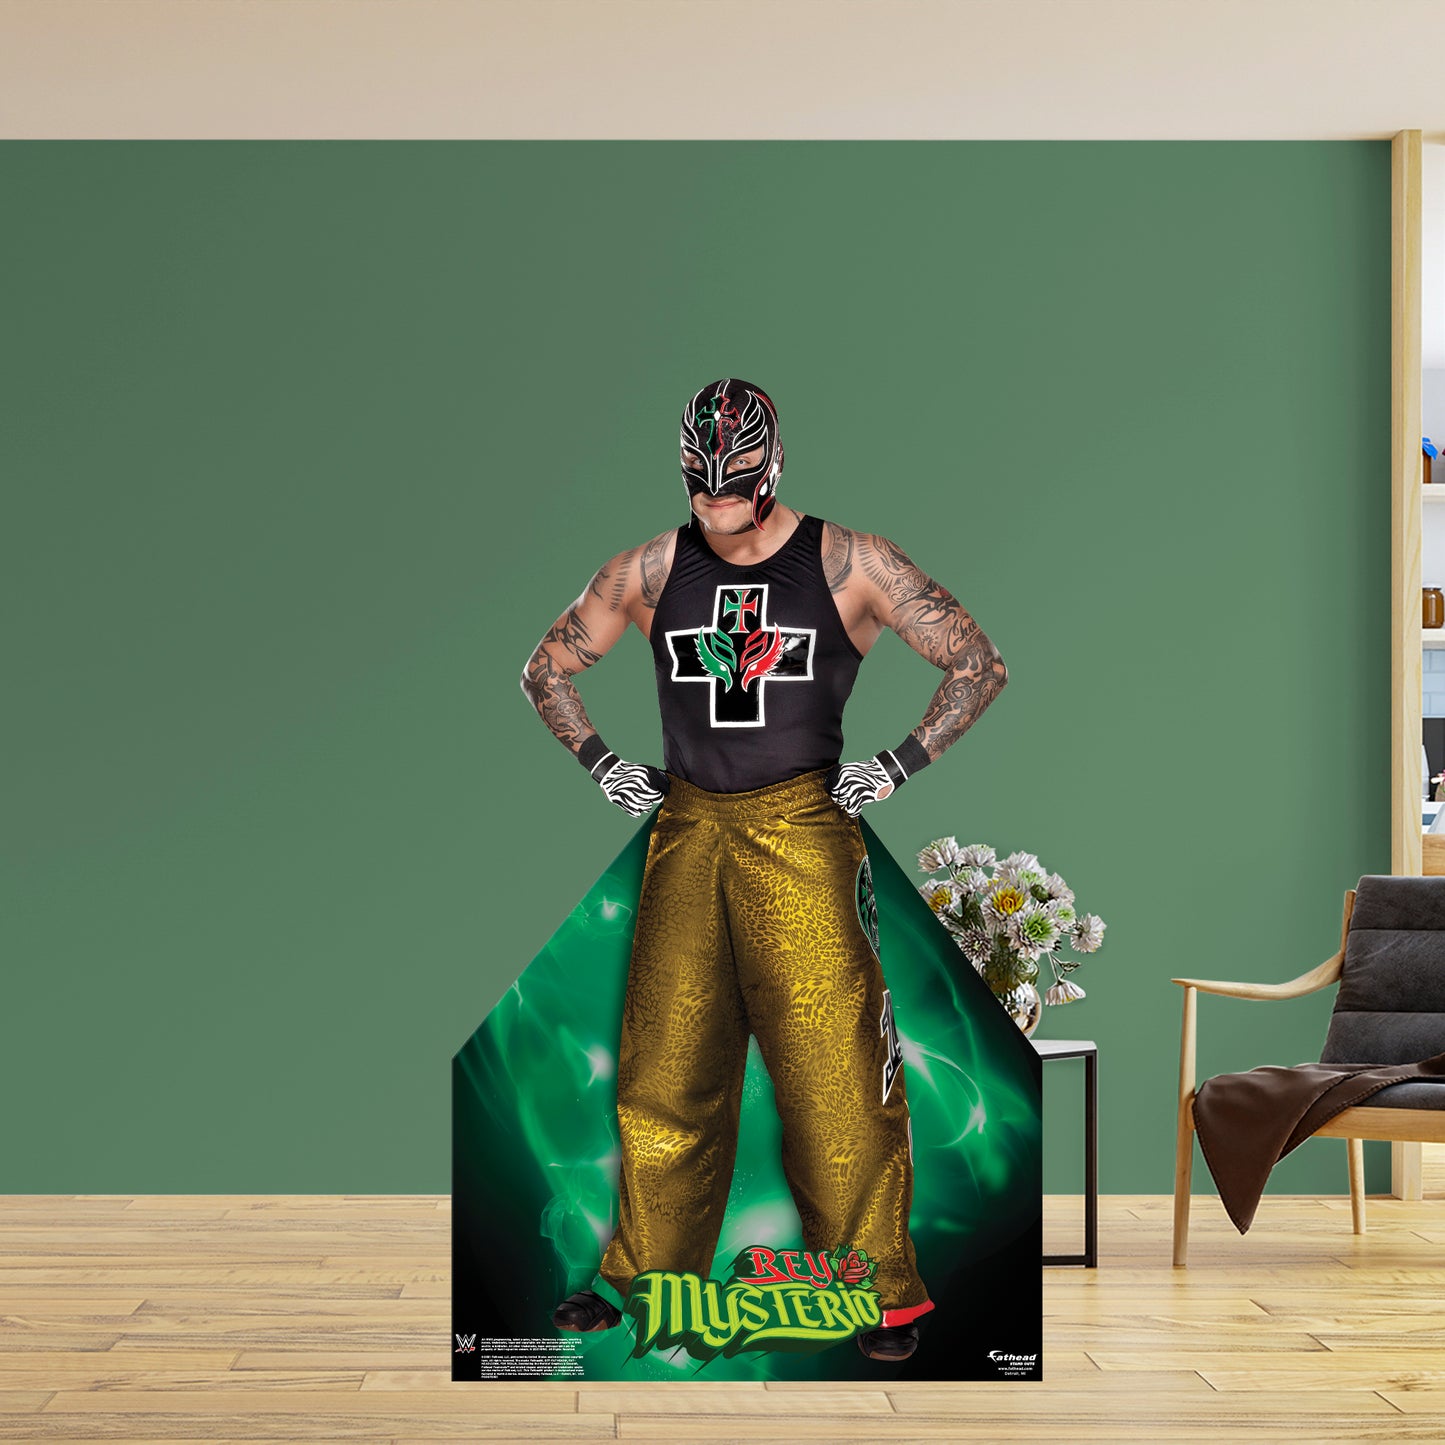 Rey Mysterio 2021   Foam Core Cutout  - Officially Licensed WWE    Stand Out